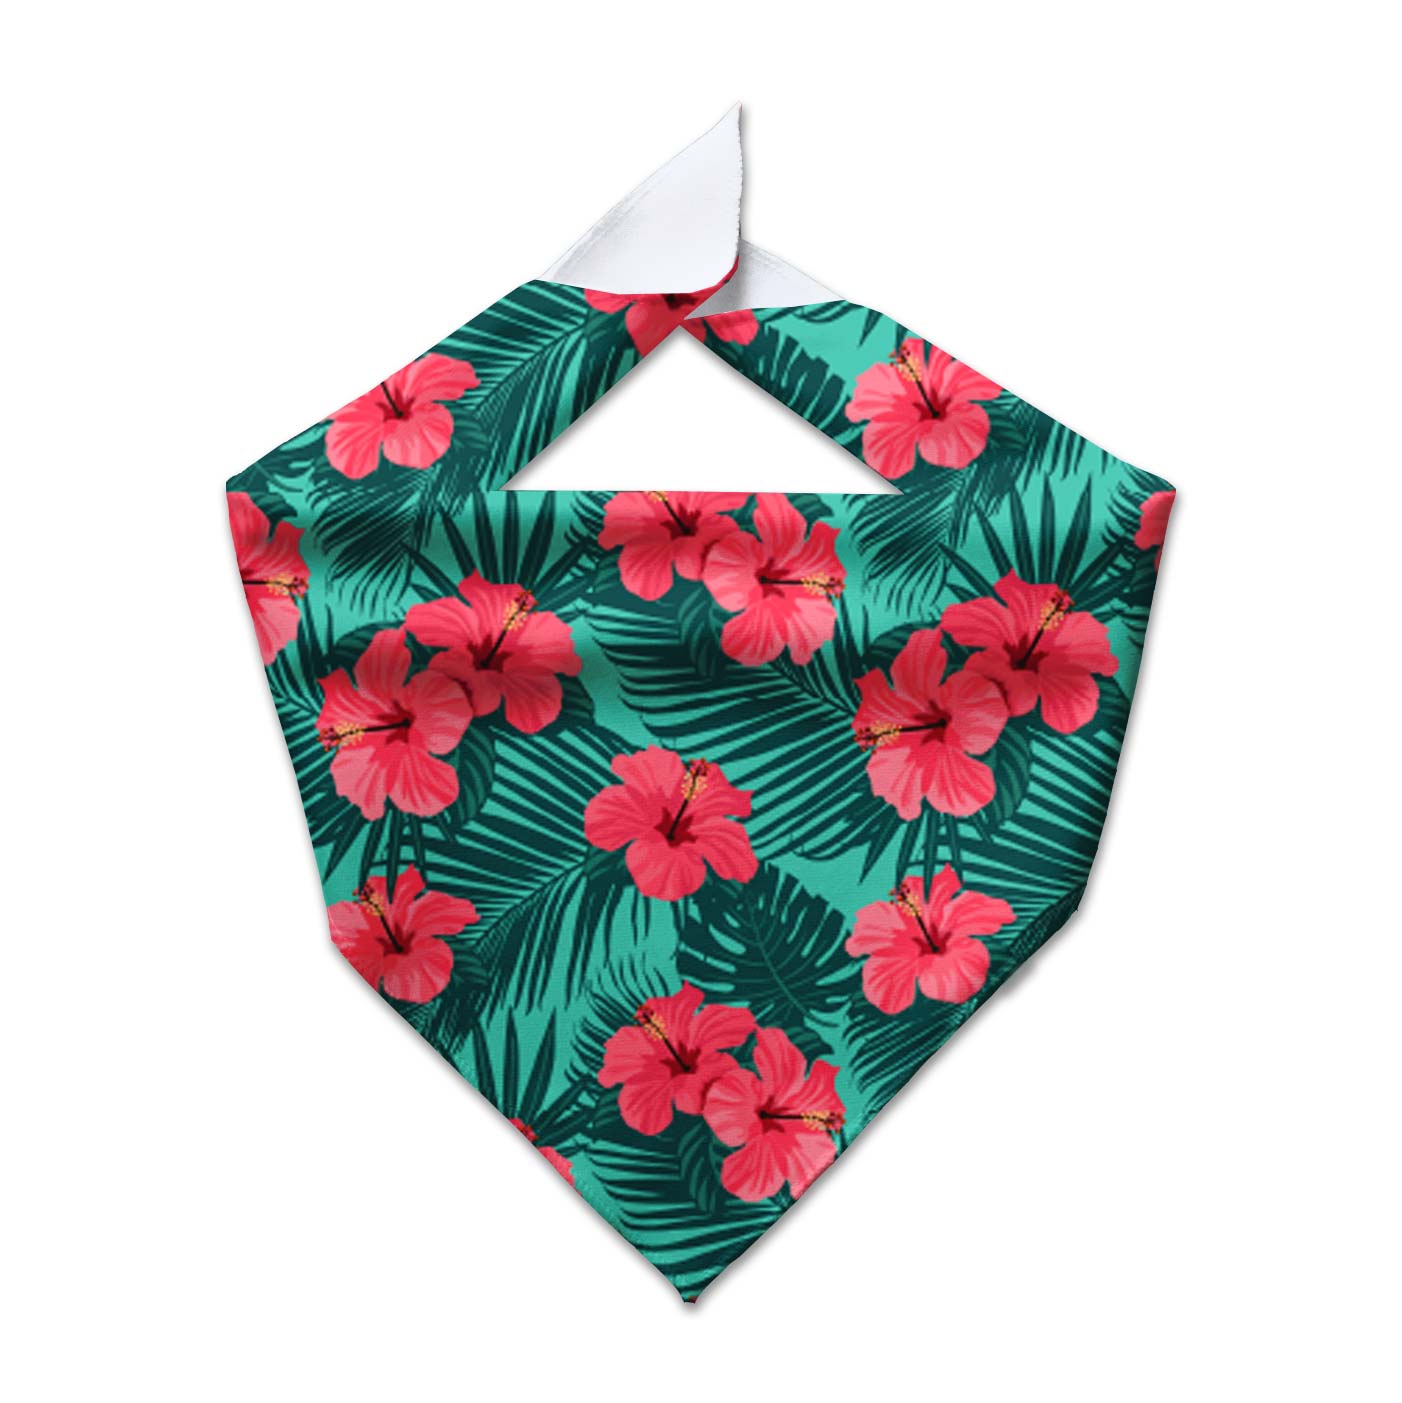 Monogram Hype | Cooling Bandanna - Red - L